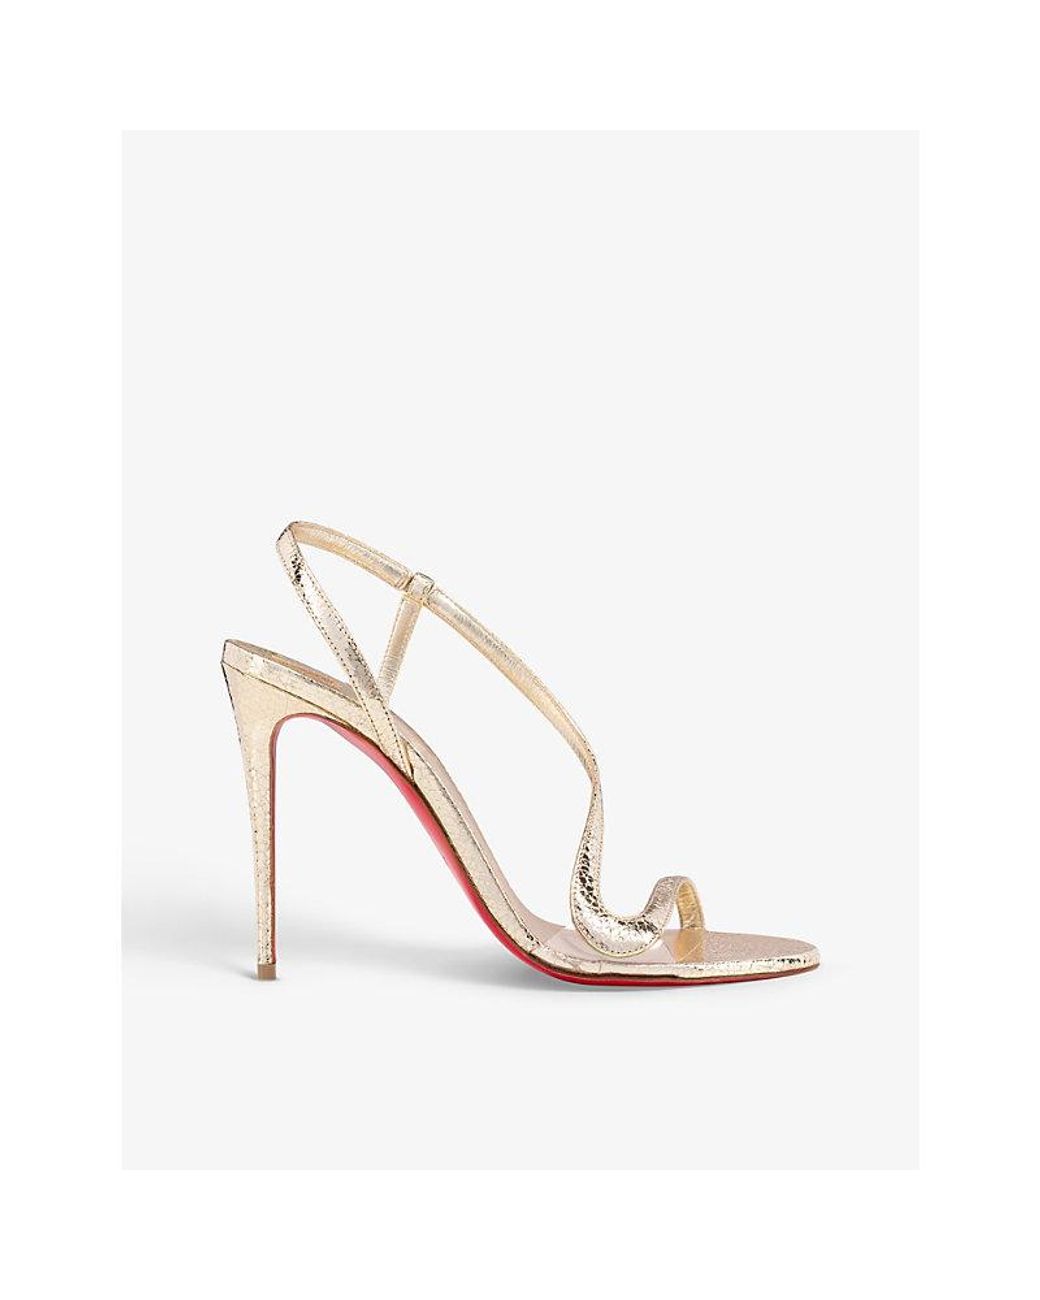 Rosalie Strass Embellished Sandals in Gold - Christian Louboutin